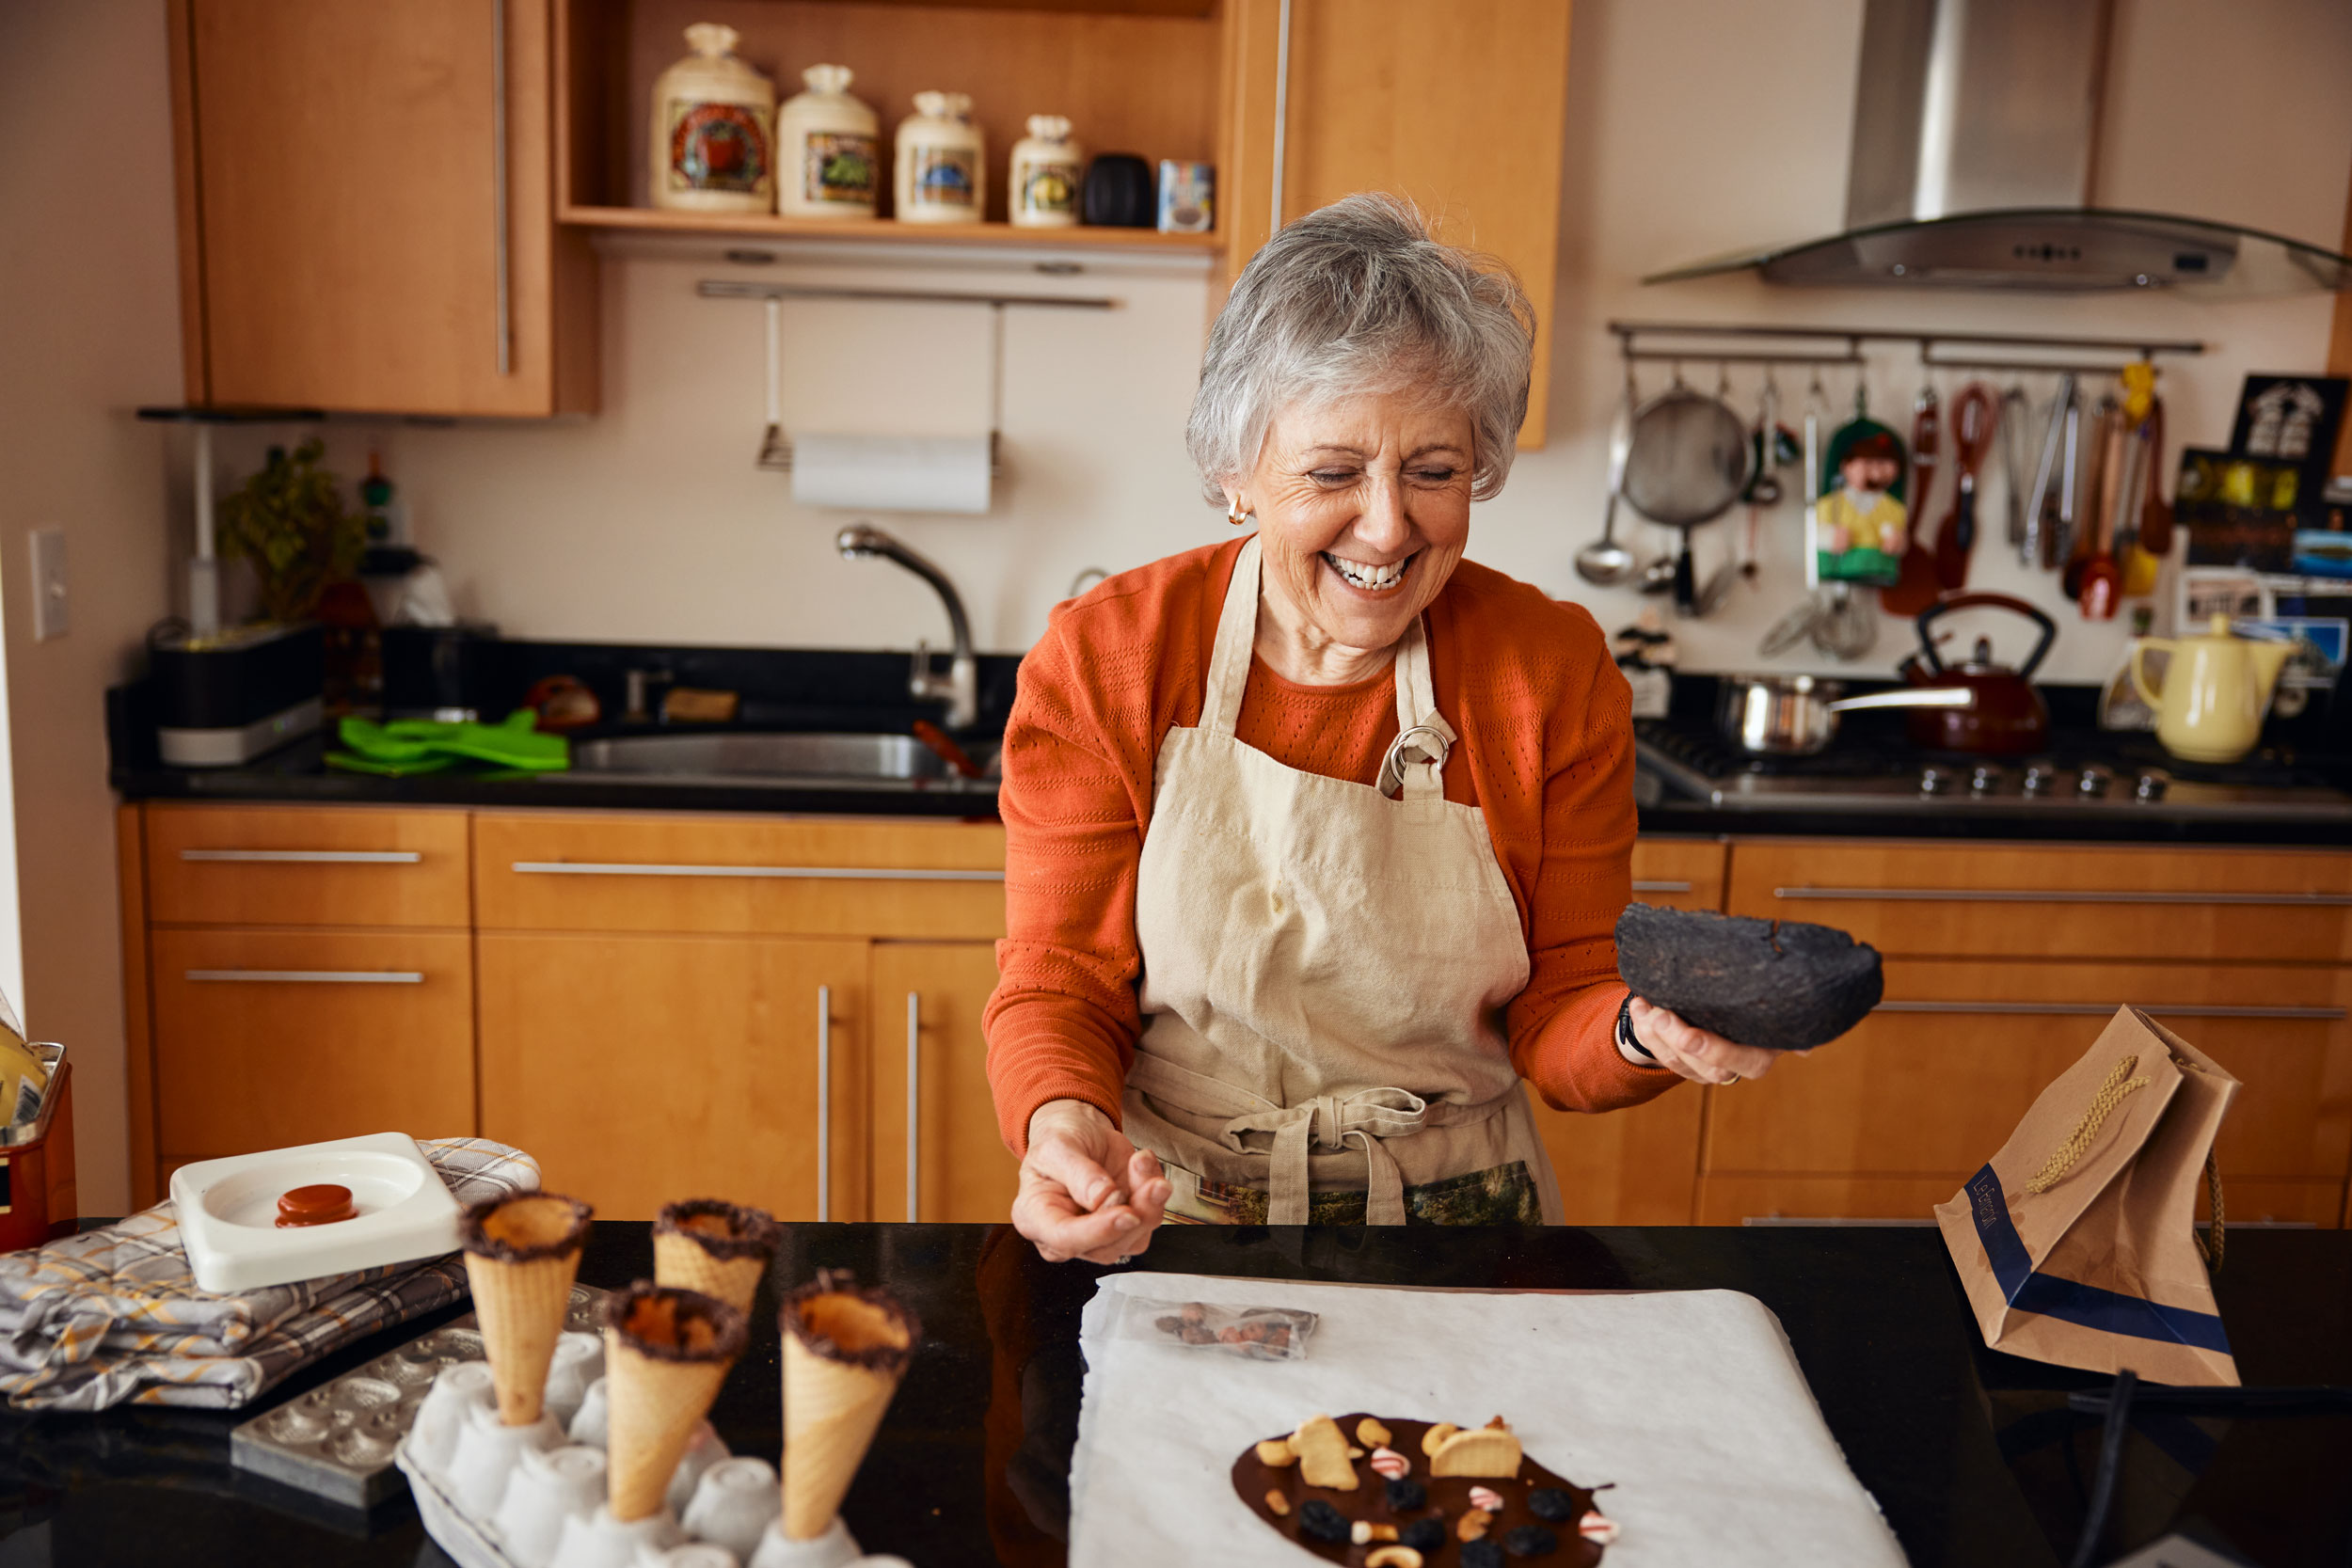 gray-haired-woman-laughing-kitchen-new-york-natural-moment-commercial-photography